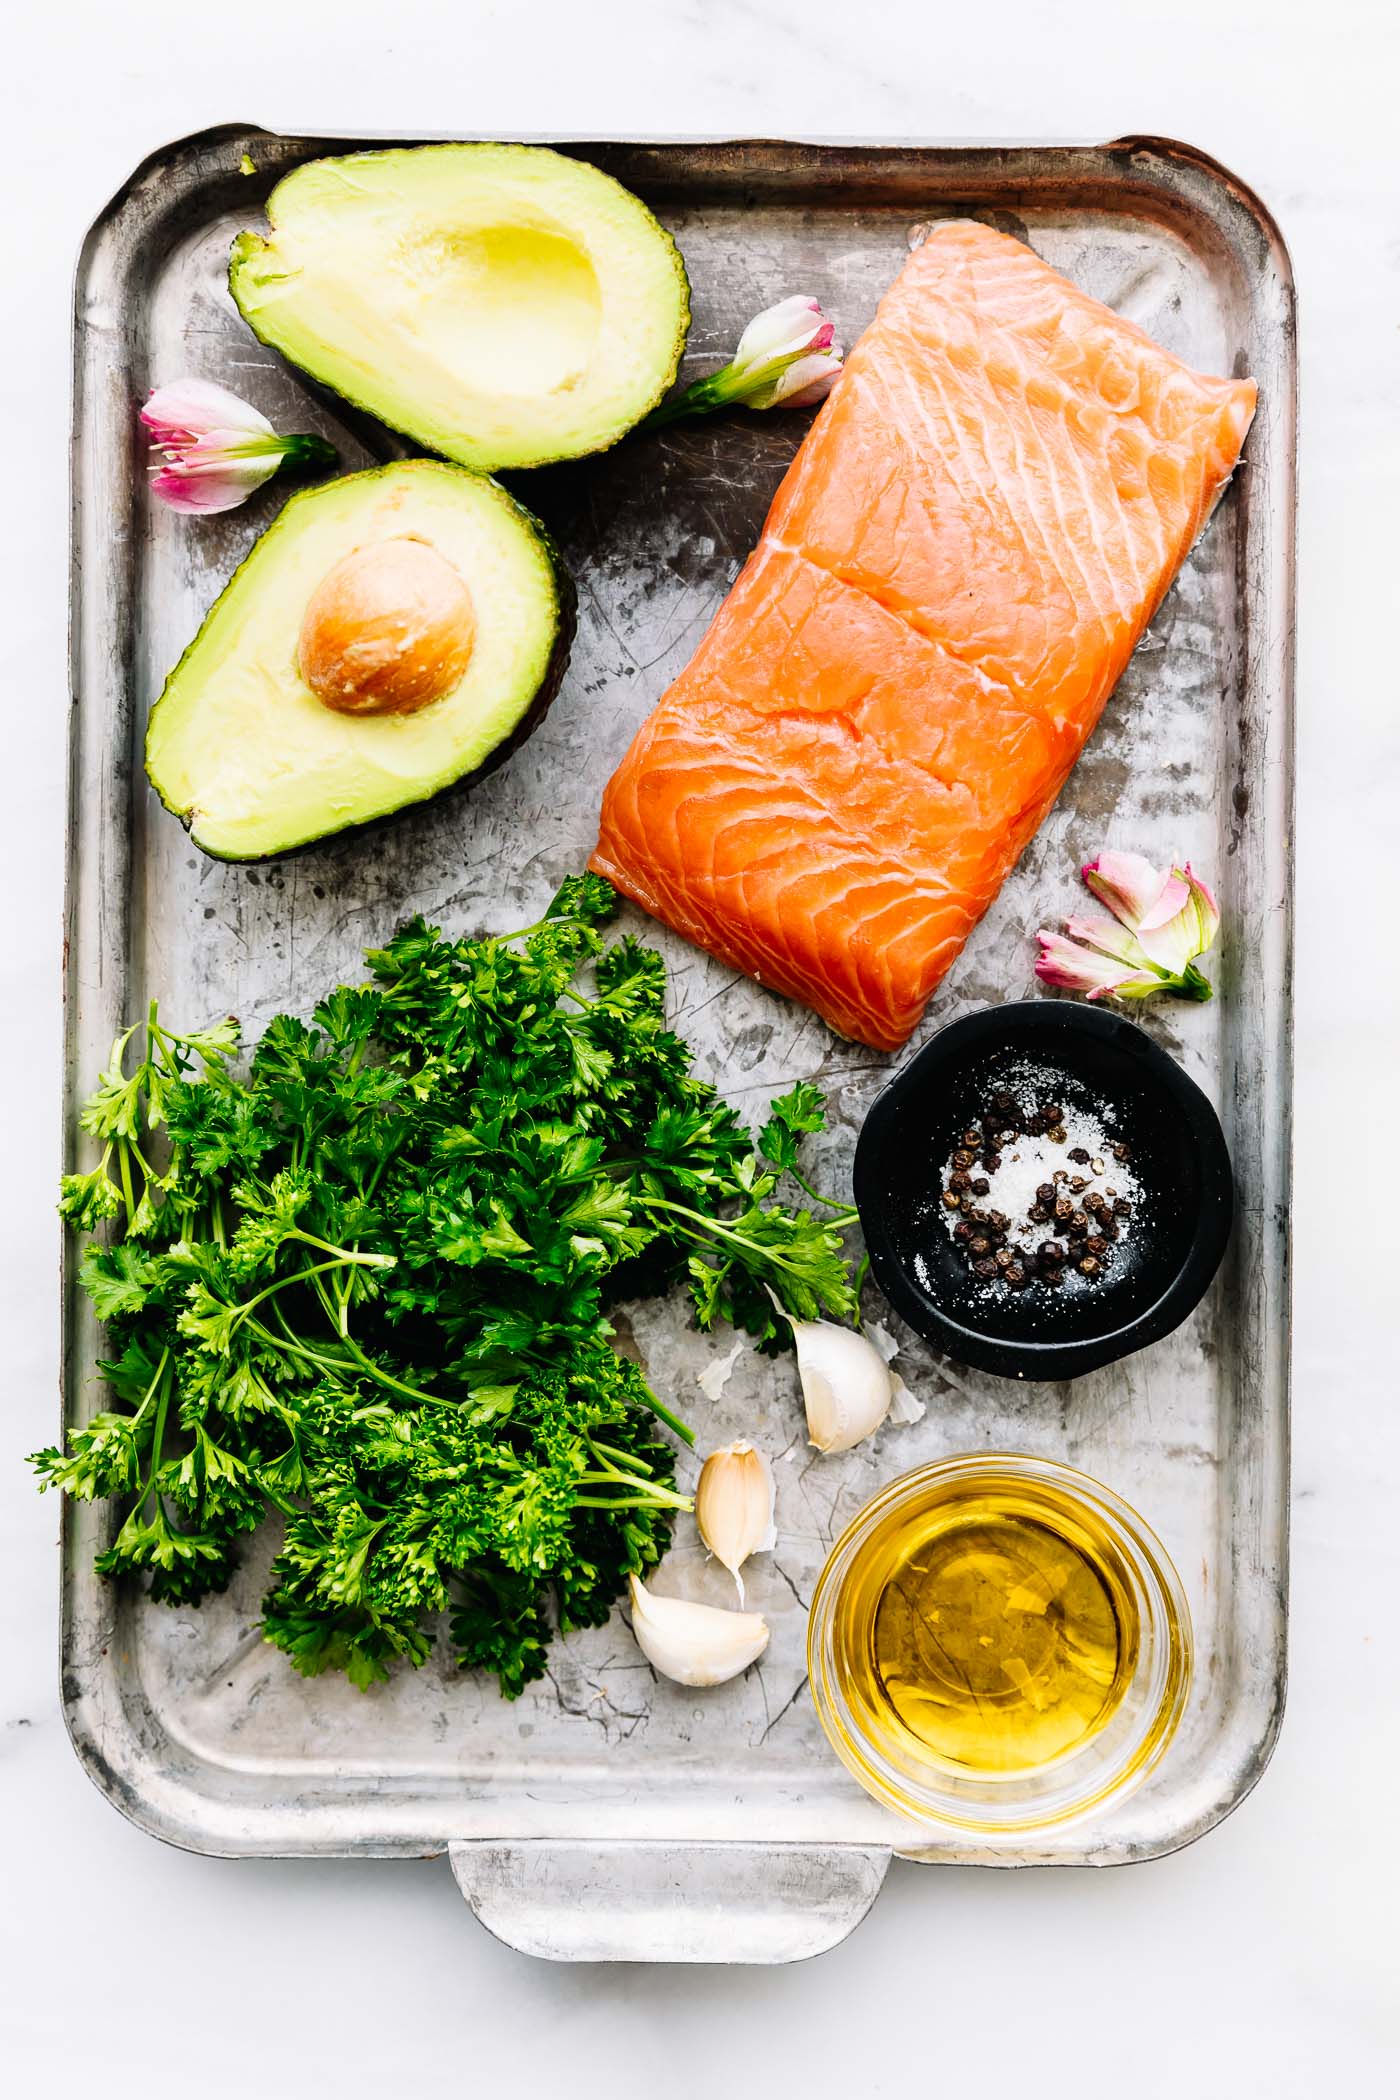 All ingredients for pan seared salmon with avocado gremolata in a silver baking pan.